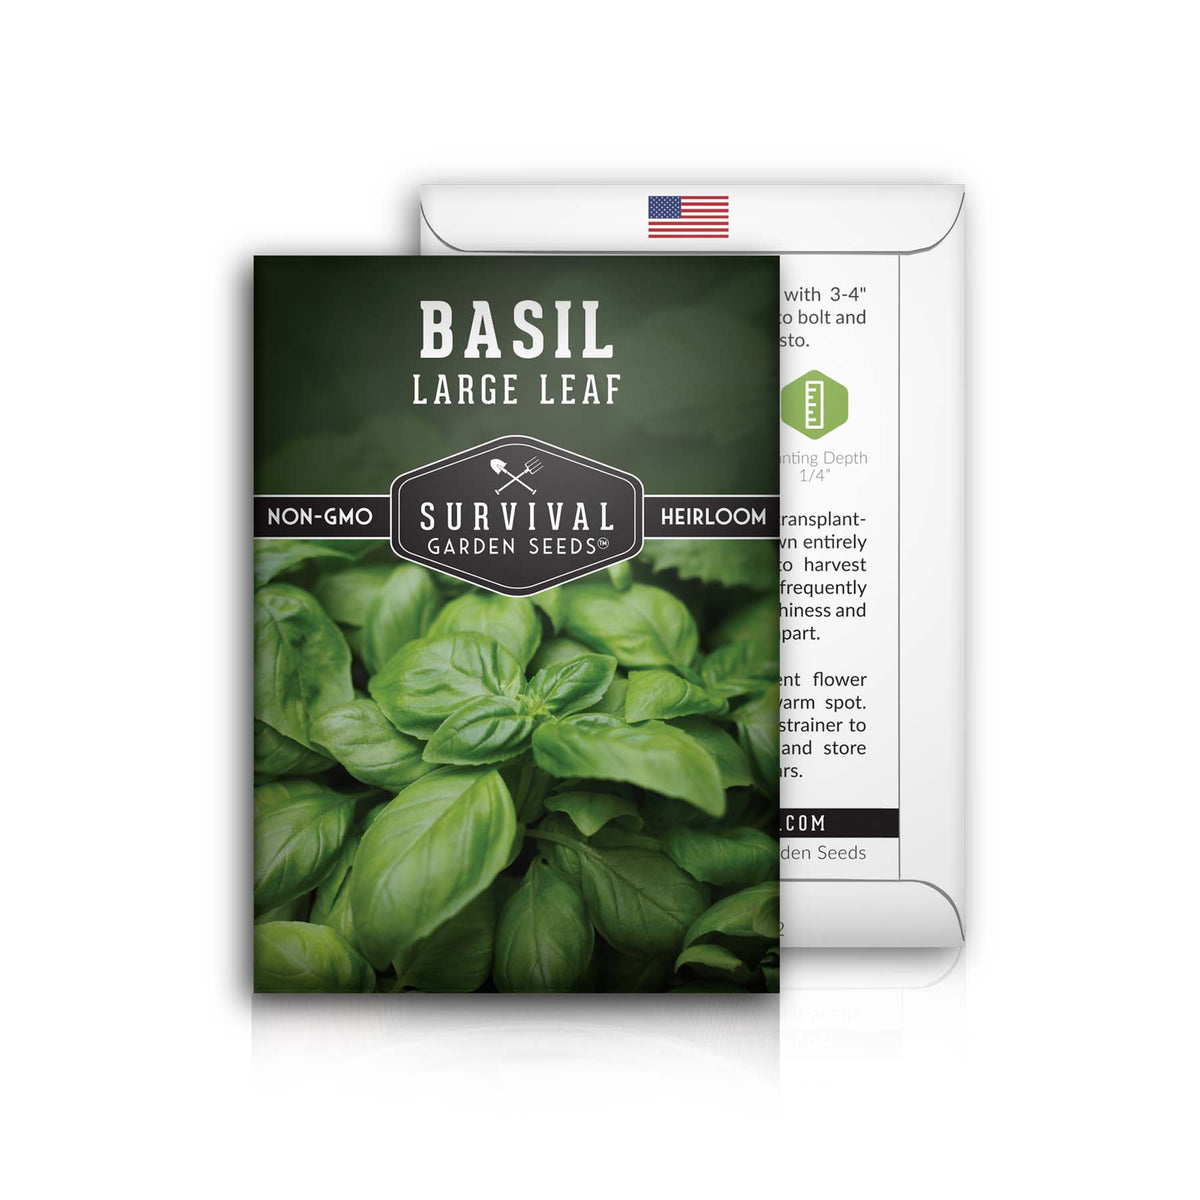 Basil packet has complete planting instructions